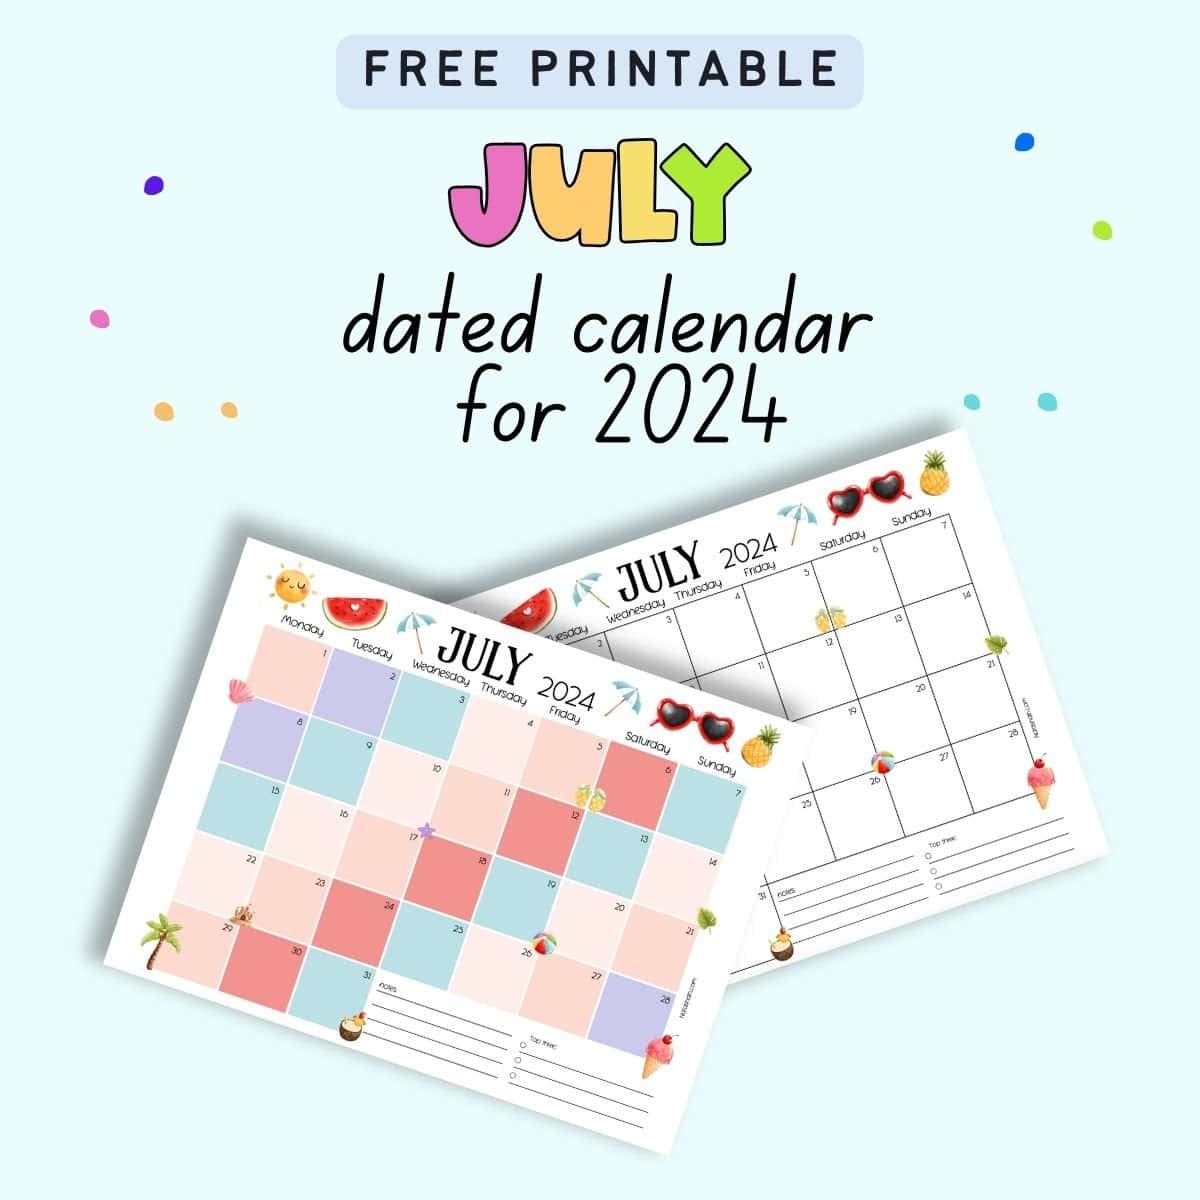 Text "free printable July dated calendar for 2024" with a preview of two July calendar pages dated for 2024.